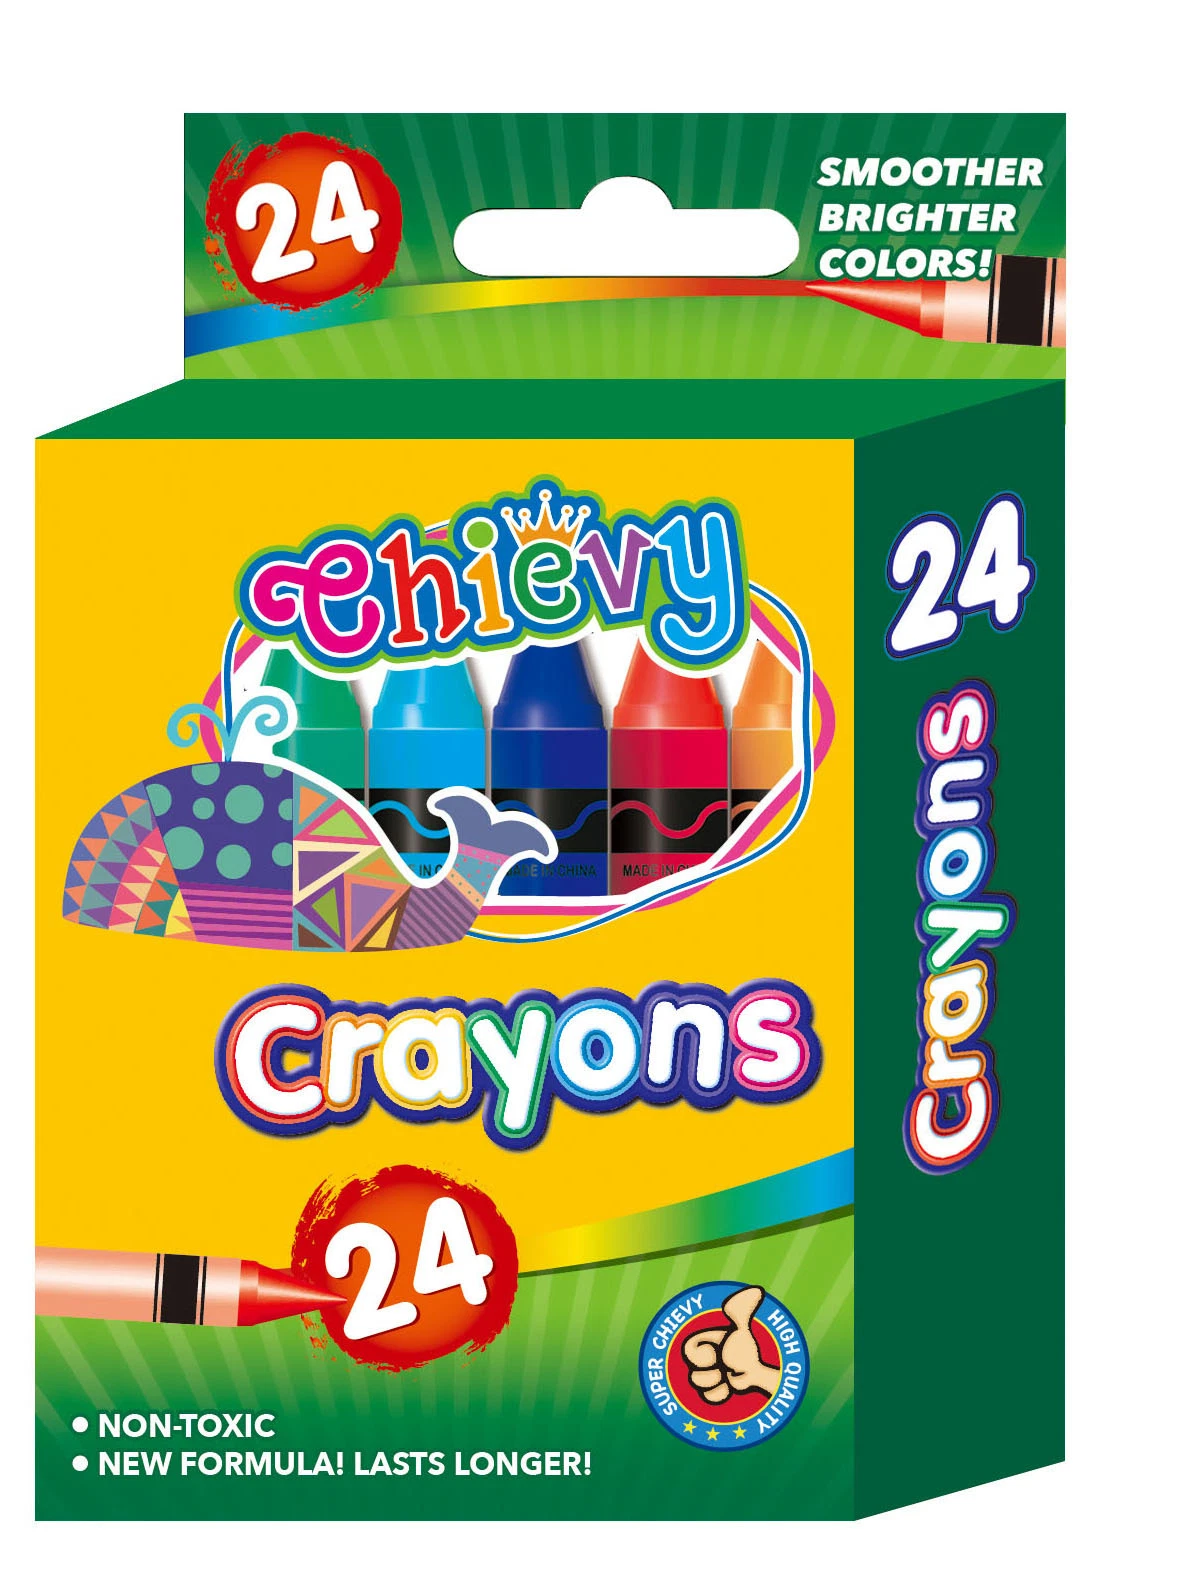 Crayola 24 PCS Glitter Neon Crayons Wholesale/Supplier Art Stationery Safe Non-Toxic for Kids Children Drawing